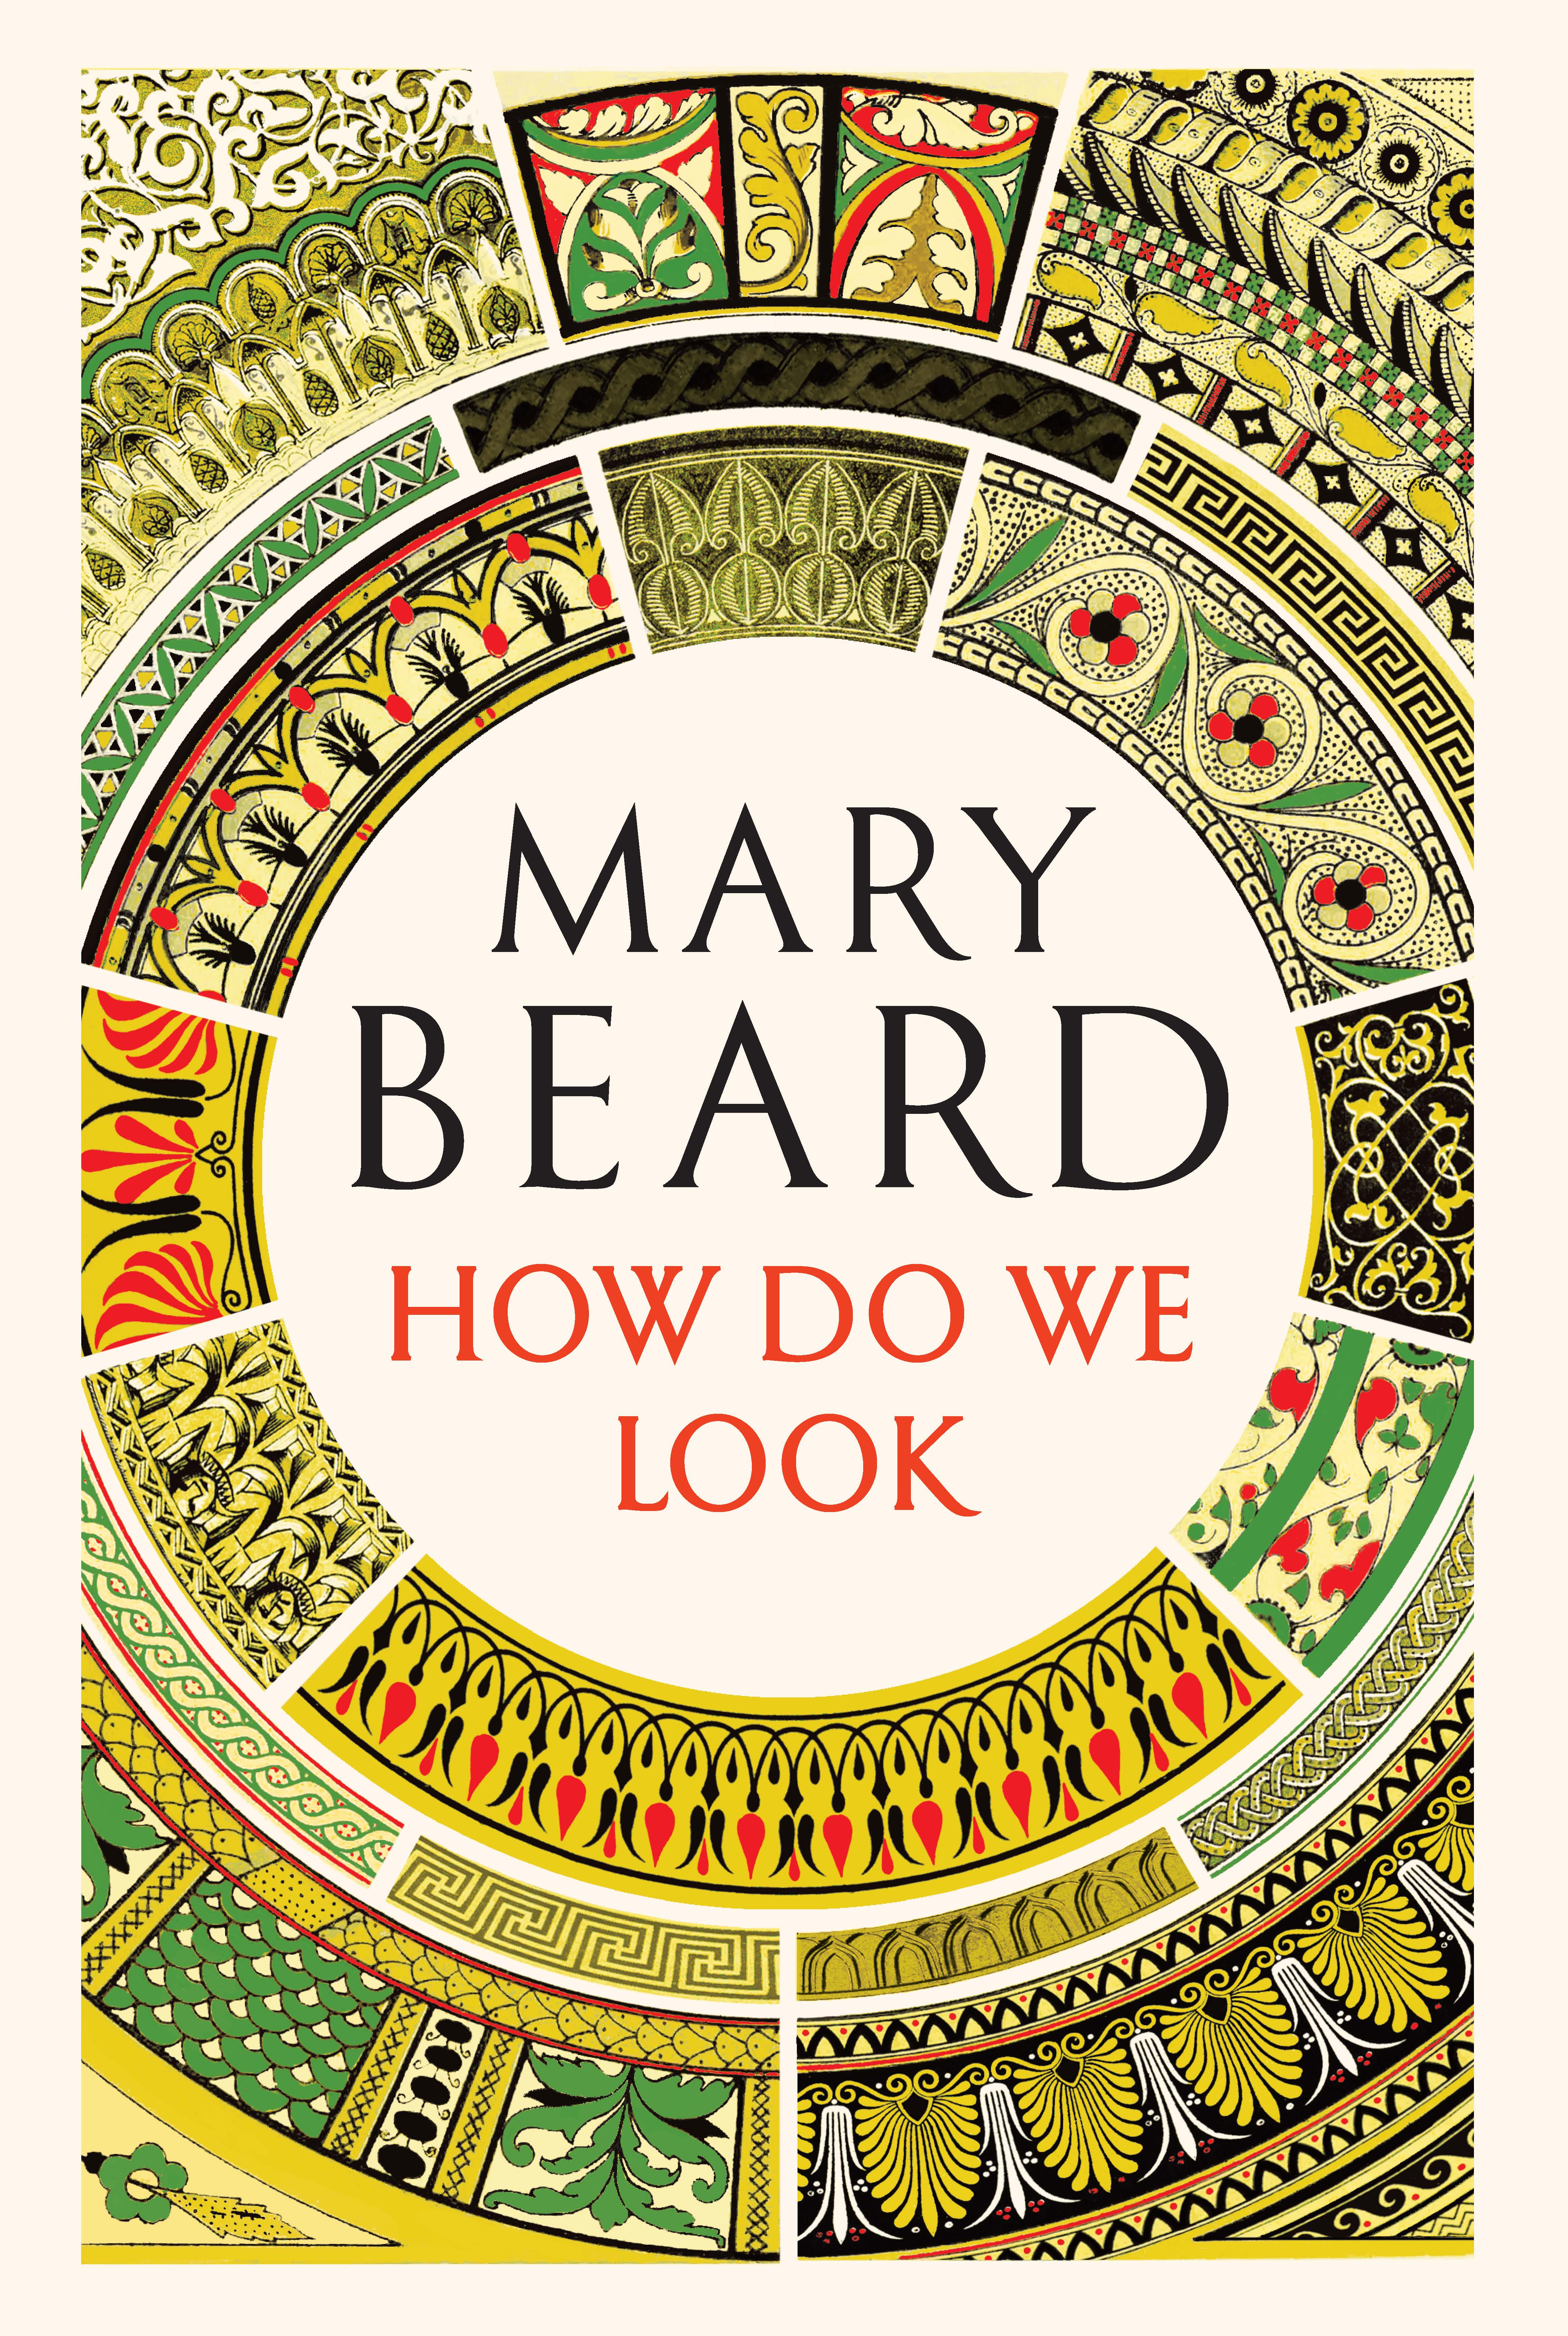 Mary Beard's new book shifts the focus of art history away from the artist (Liveright Publishing)